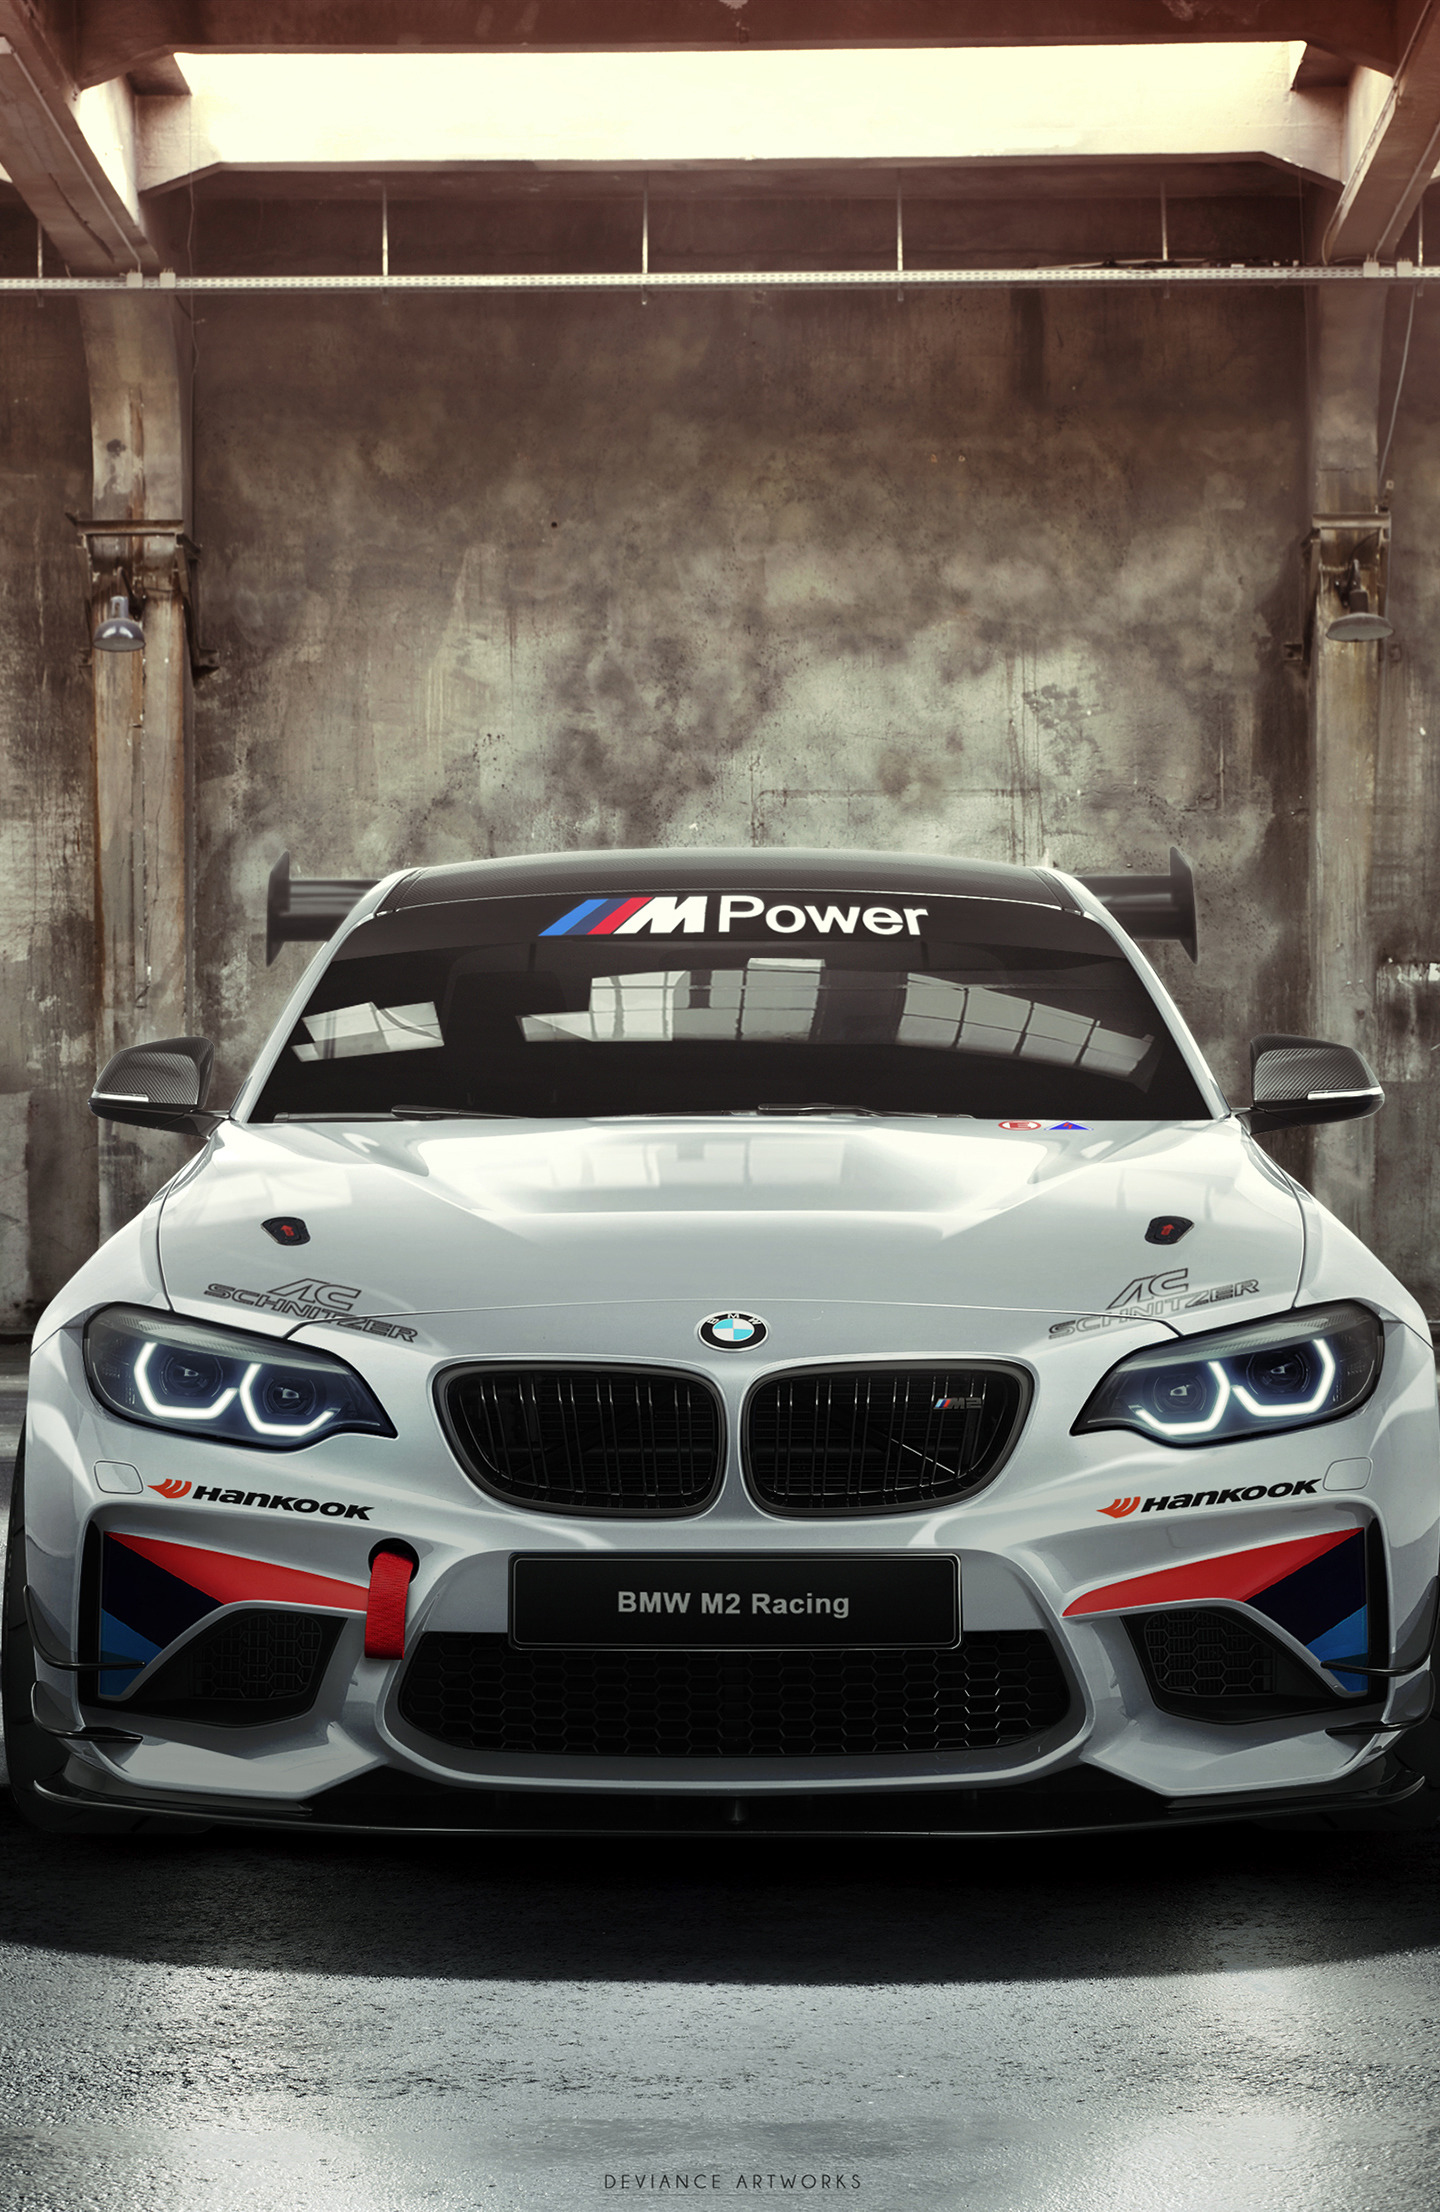 Download 1440x2560 Wallpaper Bmw M235i Racing Cup Ac Schnitzer Racing Car Front Qhd Samsung Galaxy S6 S7 Edge Note Lg G4 1440x2560 Hd Image Background 1285